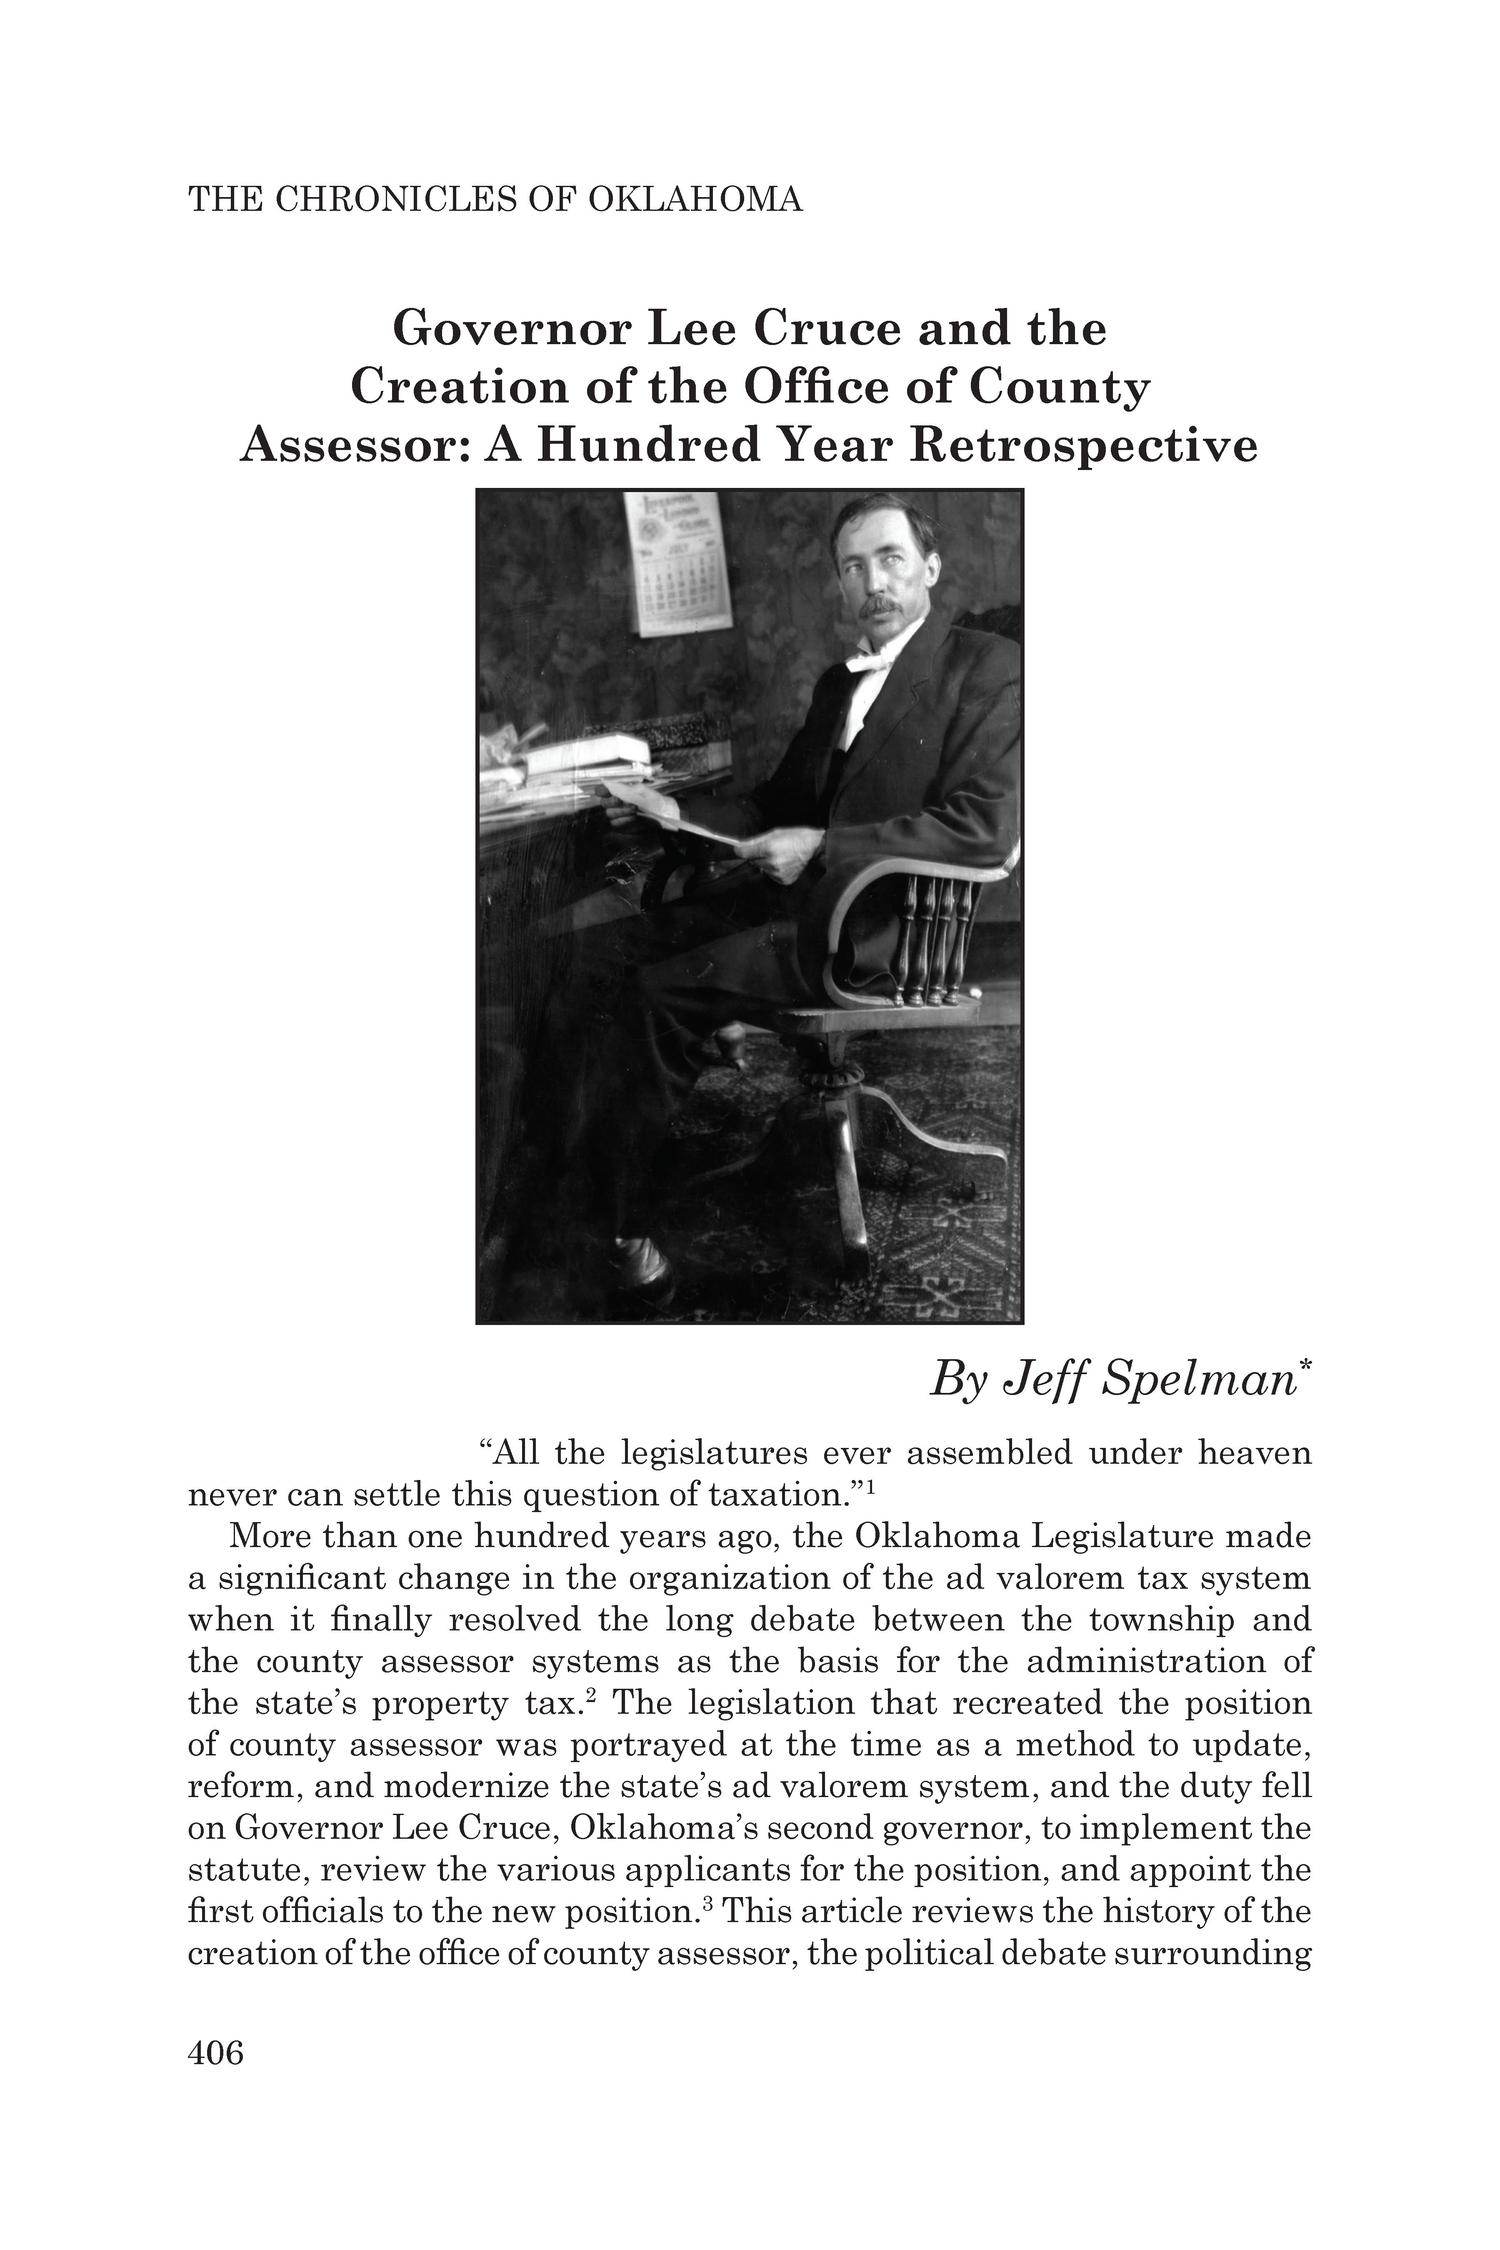 Governor Lee Cruce and the Creation of the Office of County Assessor: A  Hundred Year Retrospective - The Gateway to Oklahoma History